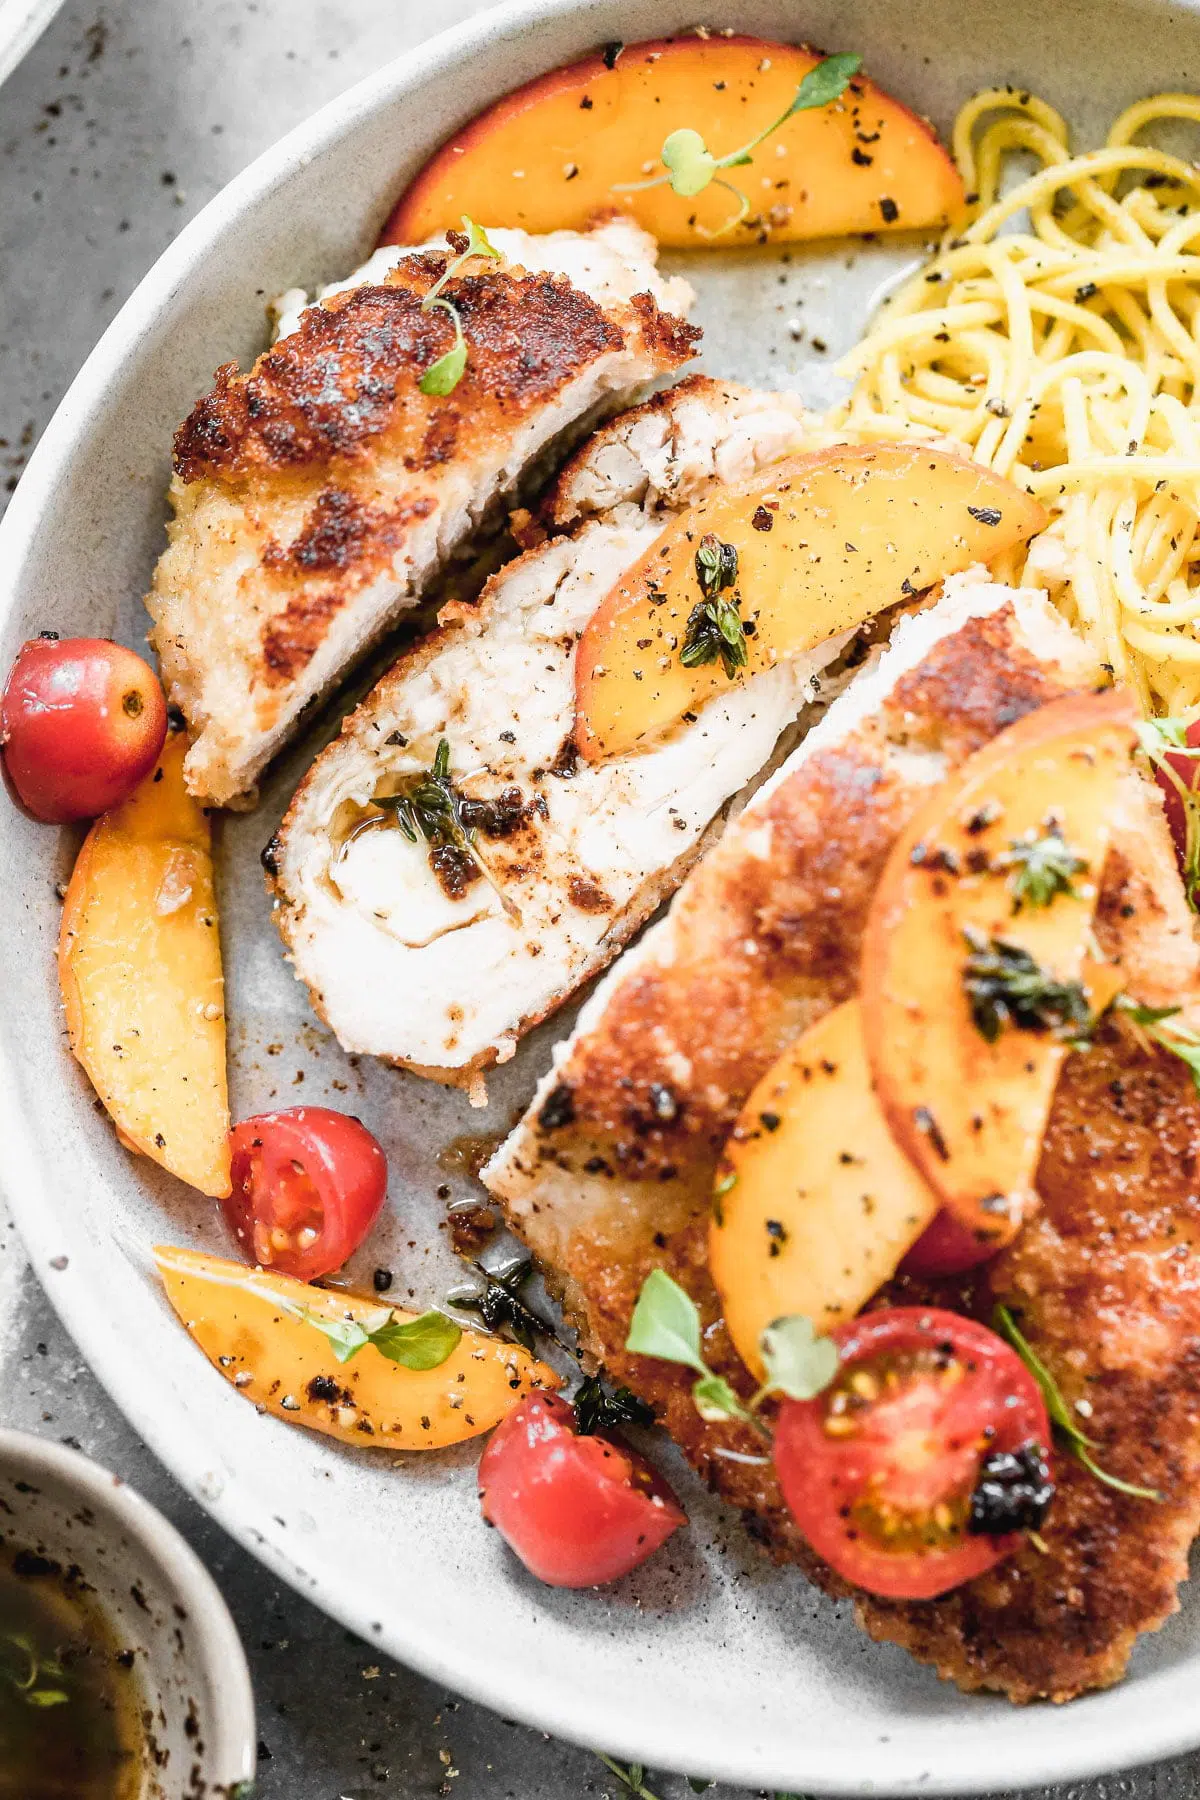 If summer were showcased on a plate it would surely be in the form of our Mozzarella-Stuffed Peach Chicken. This ultra crispy on the exterior, cheesy and tender on the interior winner of a chicken dish is adorned with the sweetest peaches and tomatoes and then drizzled with an intoxicating combination of brown butter, thyme, and lemon. You don't want to miss it!